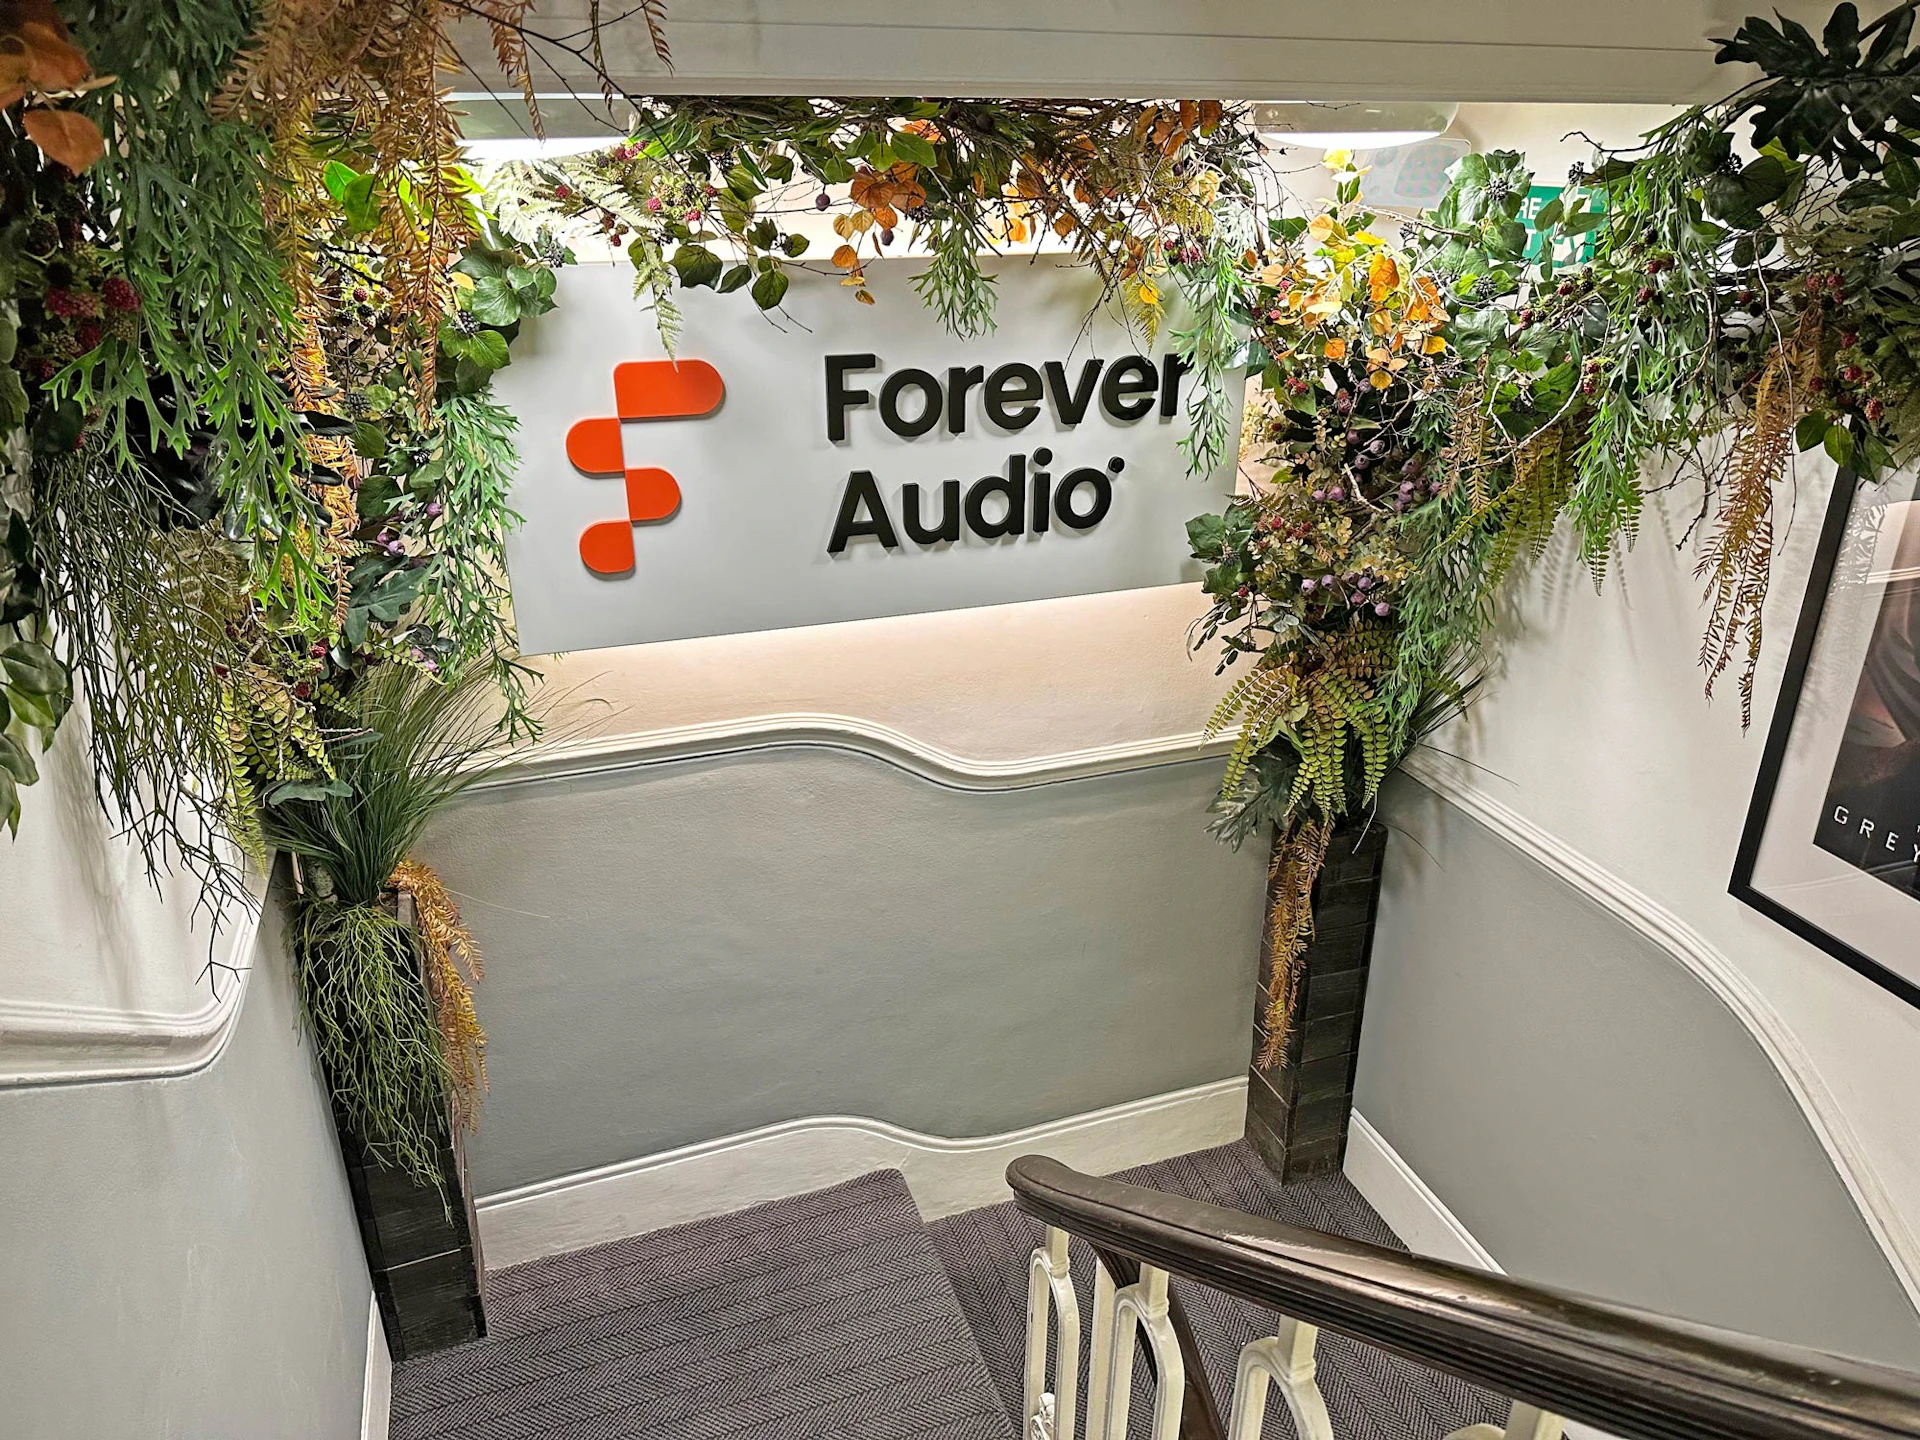 Forever Audio Main Entrance sign with trees